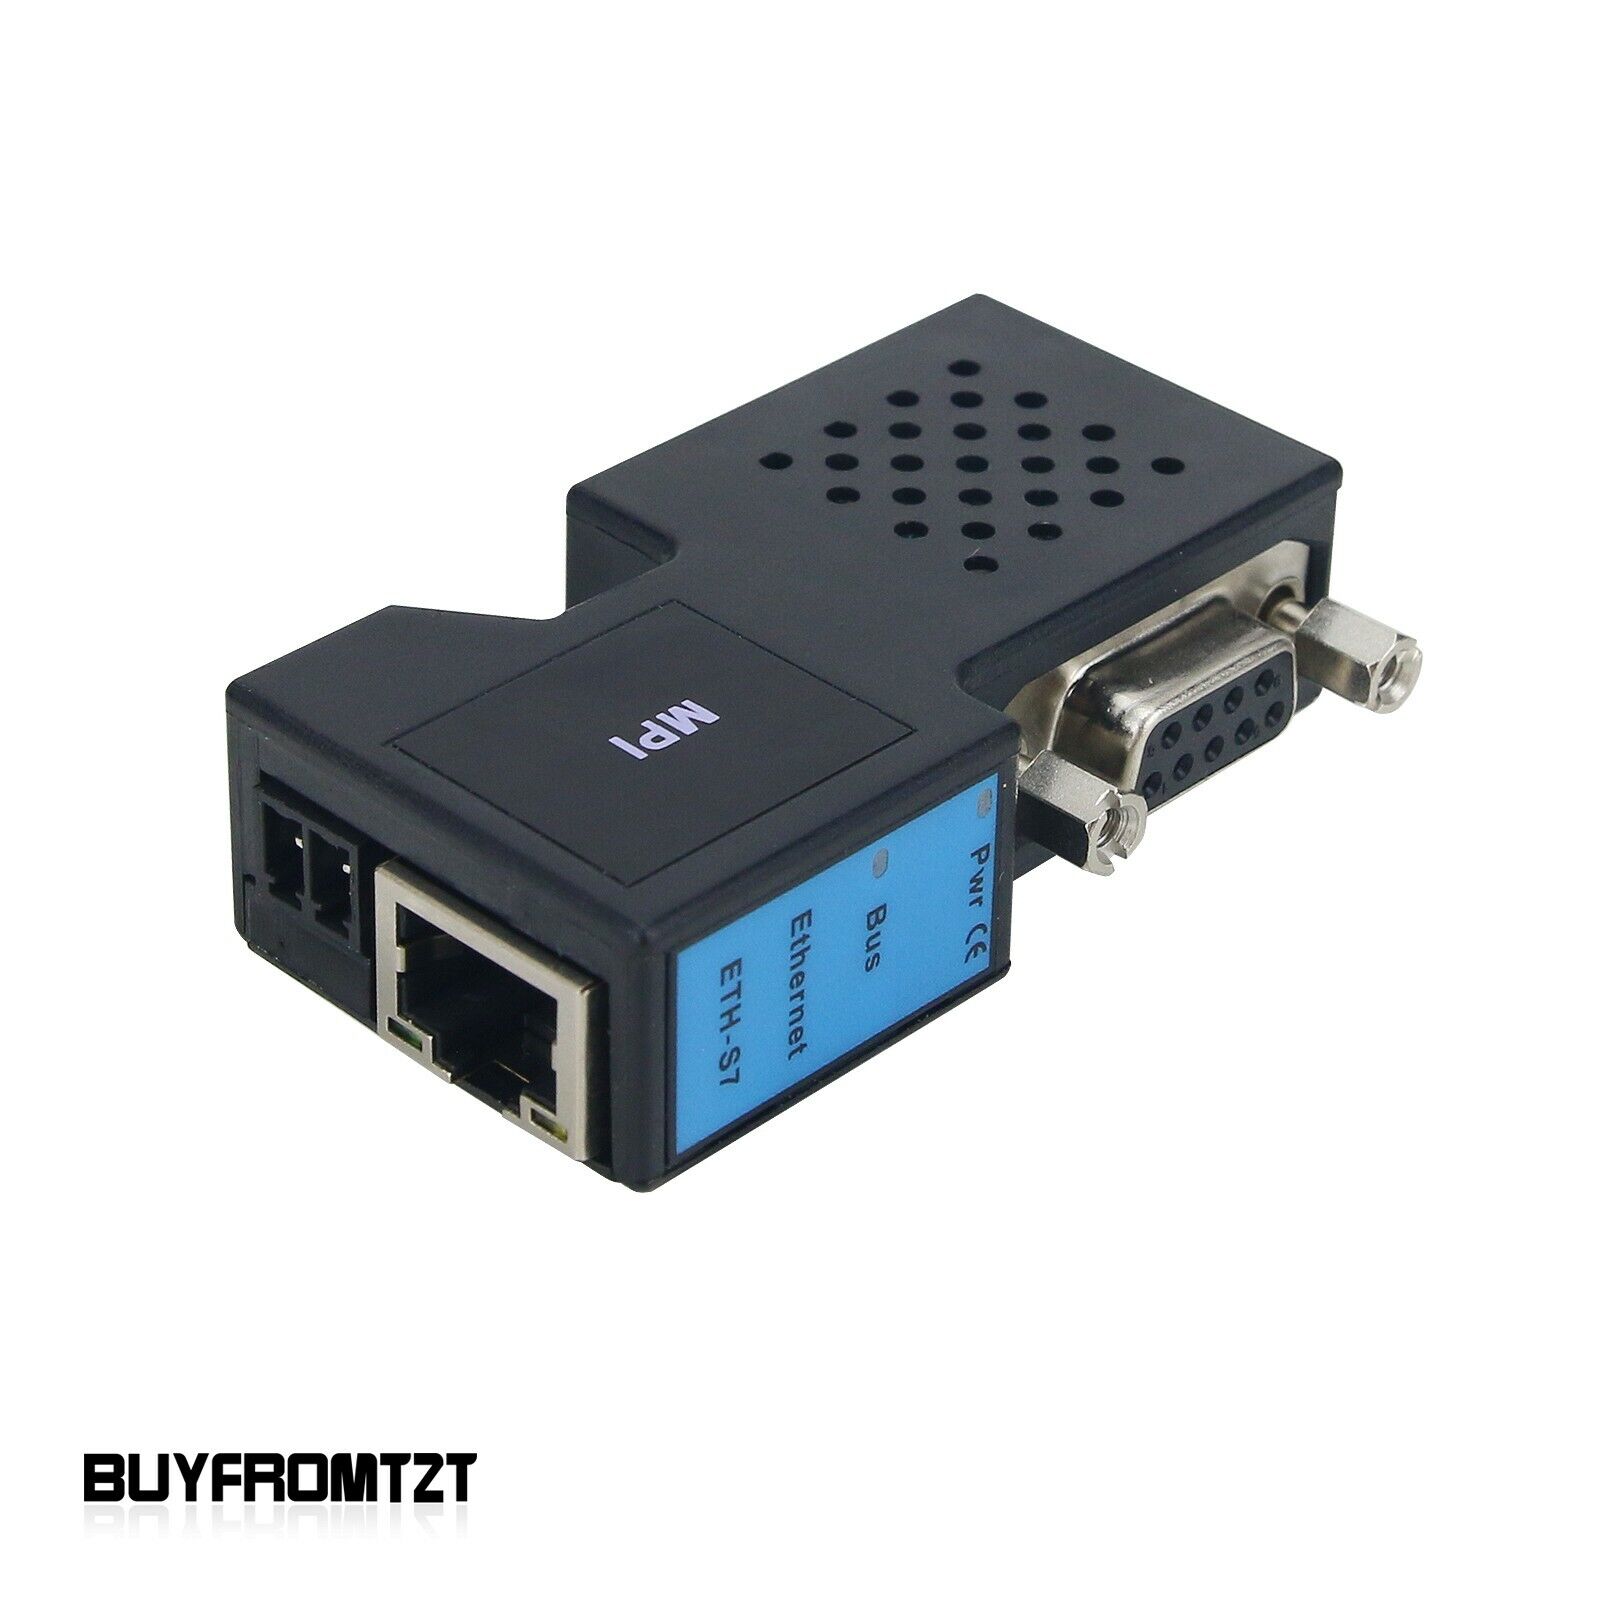 ETH-MPI/DP Ethernet to MPI/DP Connector Module for Siemens S7-300 PLC